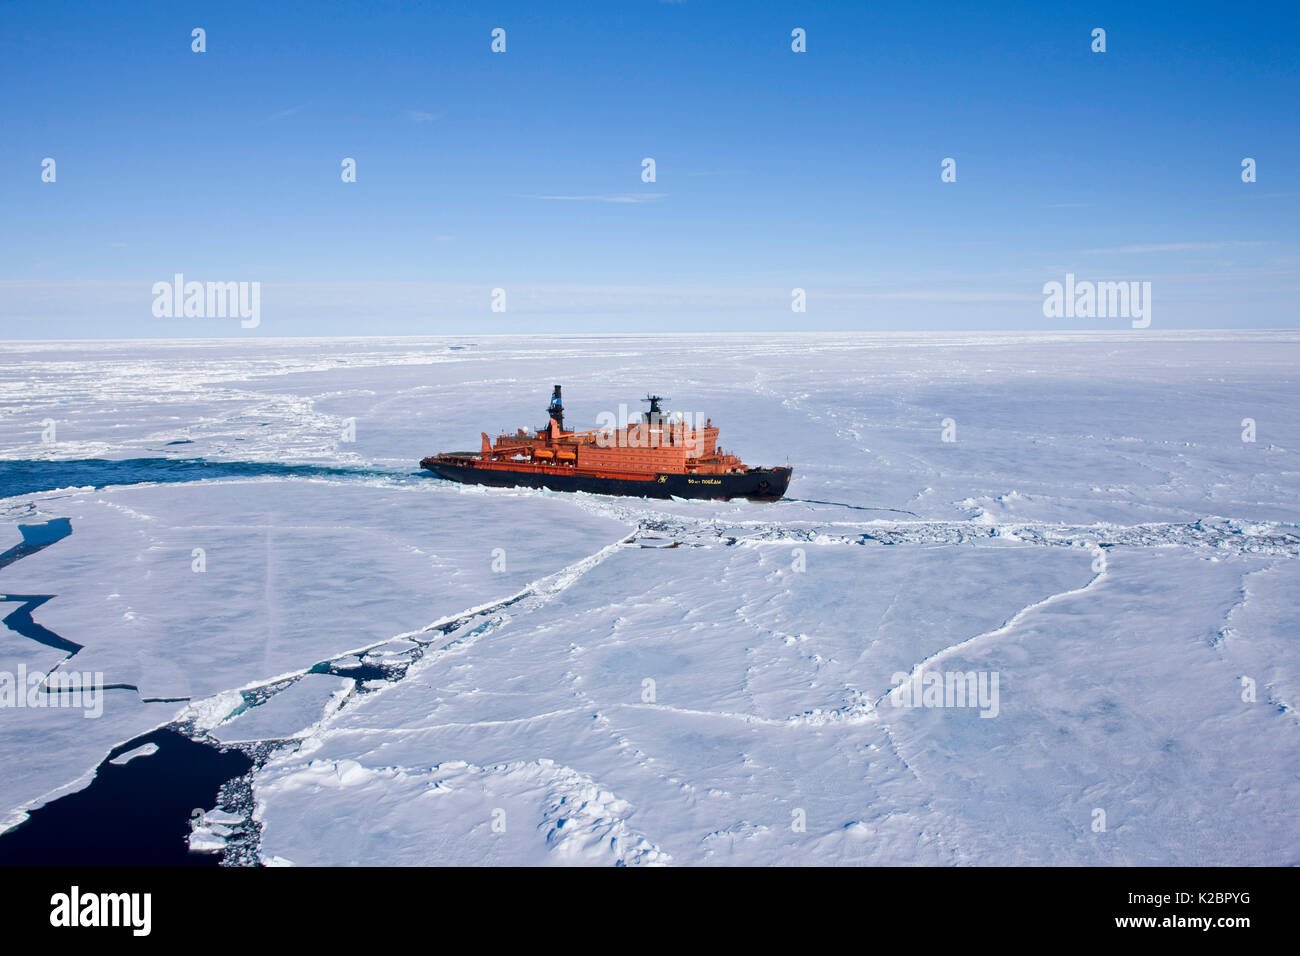 The world's largest nuclear-powered icebreaker, '50 years of Victory', on the way to the North Pole, Russian Arctic, July 2008. All non-editorial uses must be cleared individually. Stock Photo